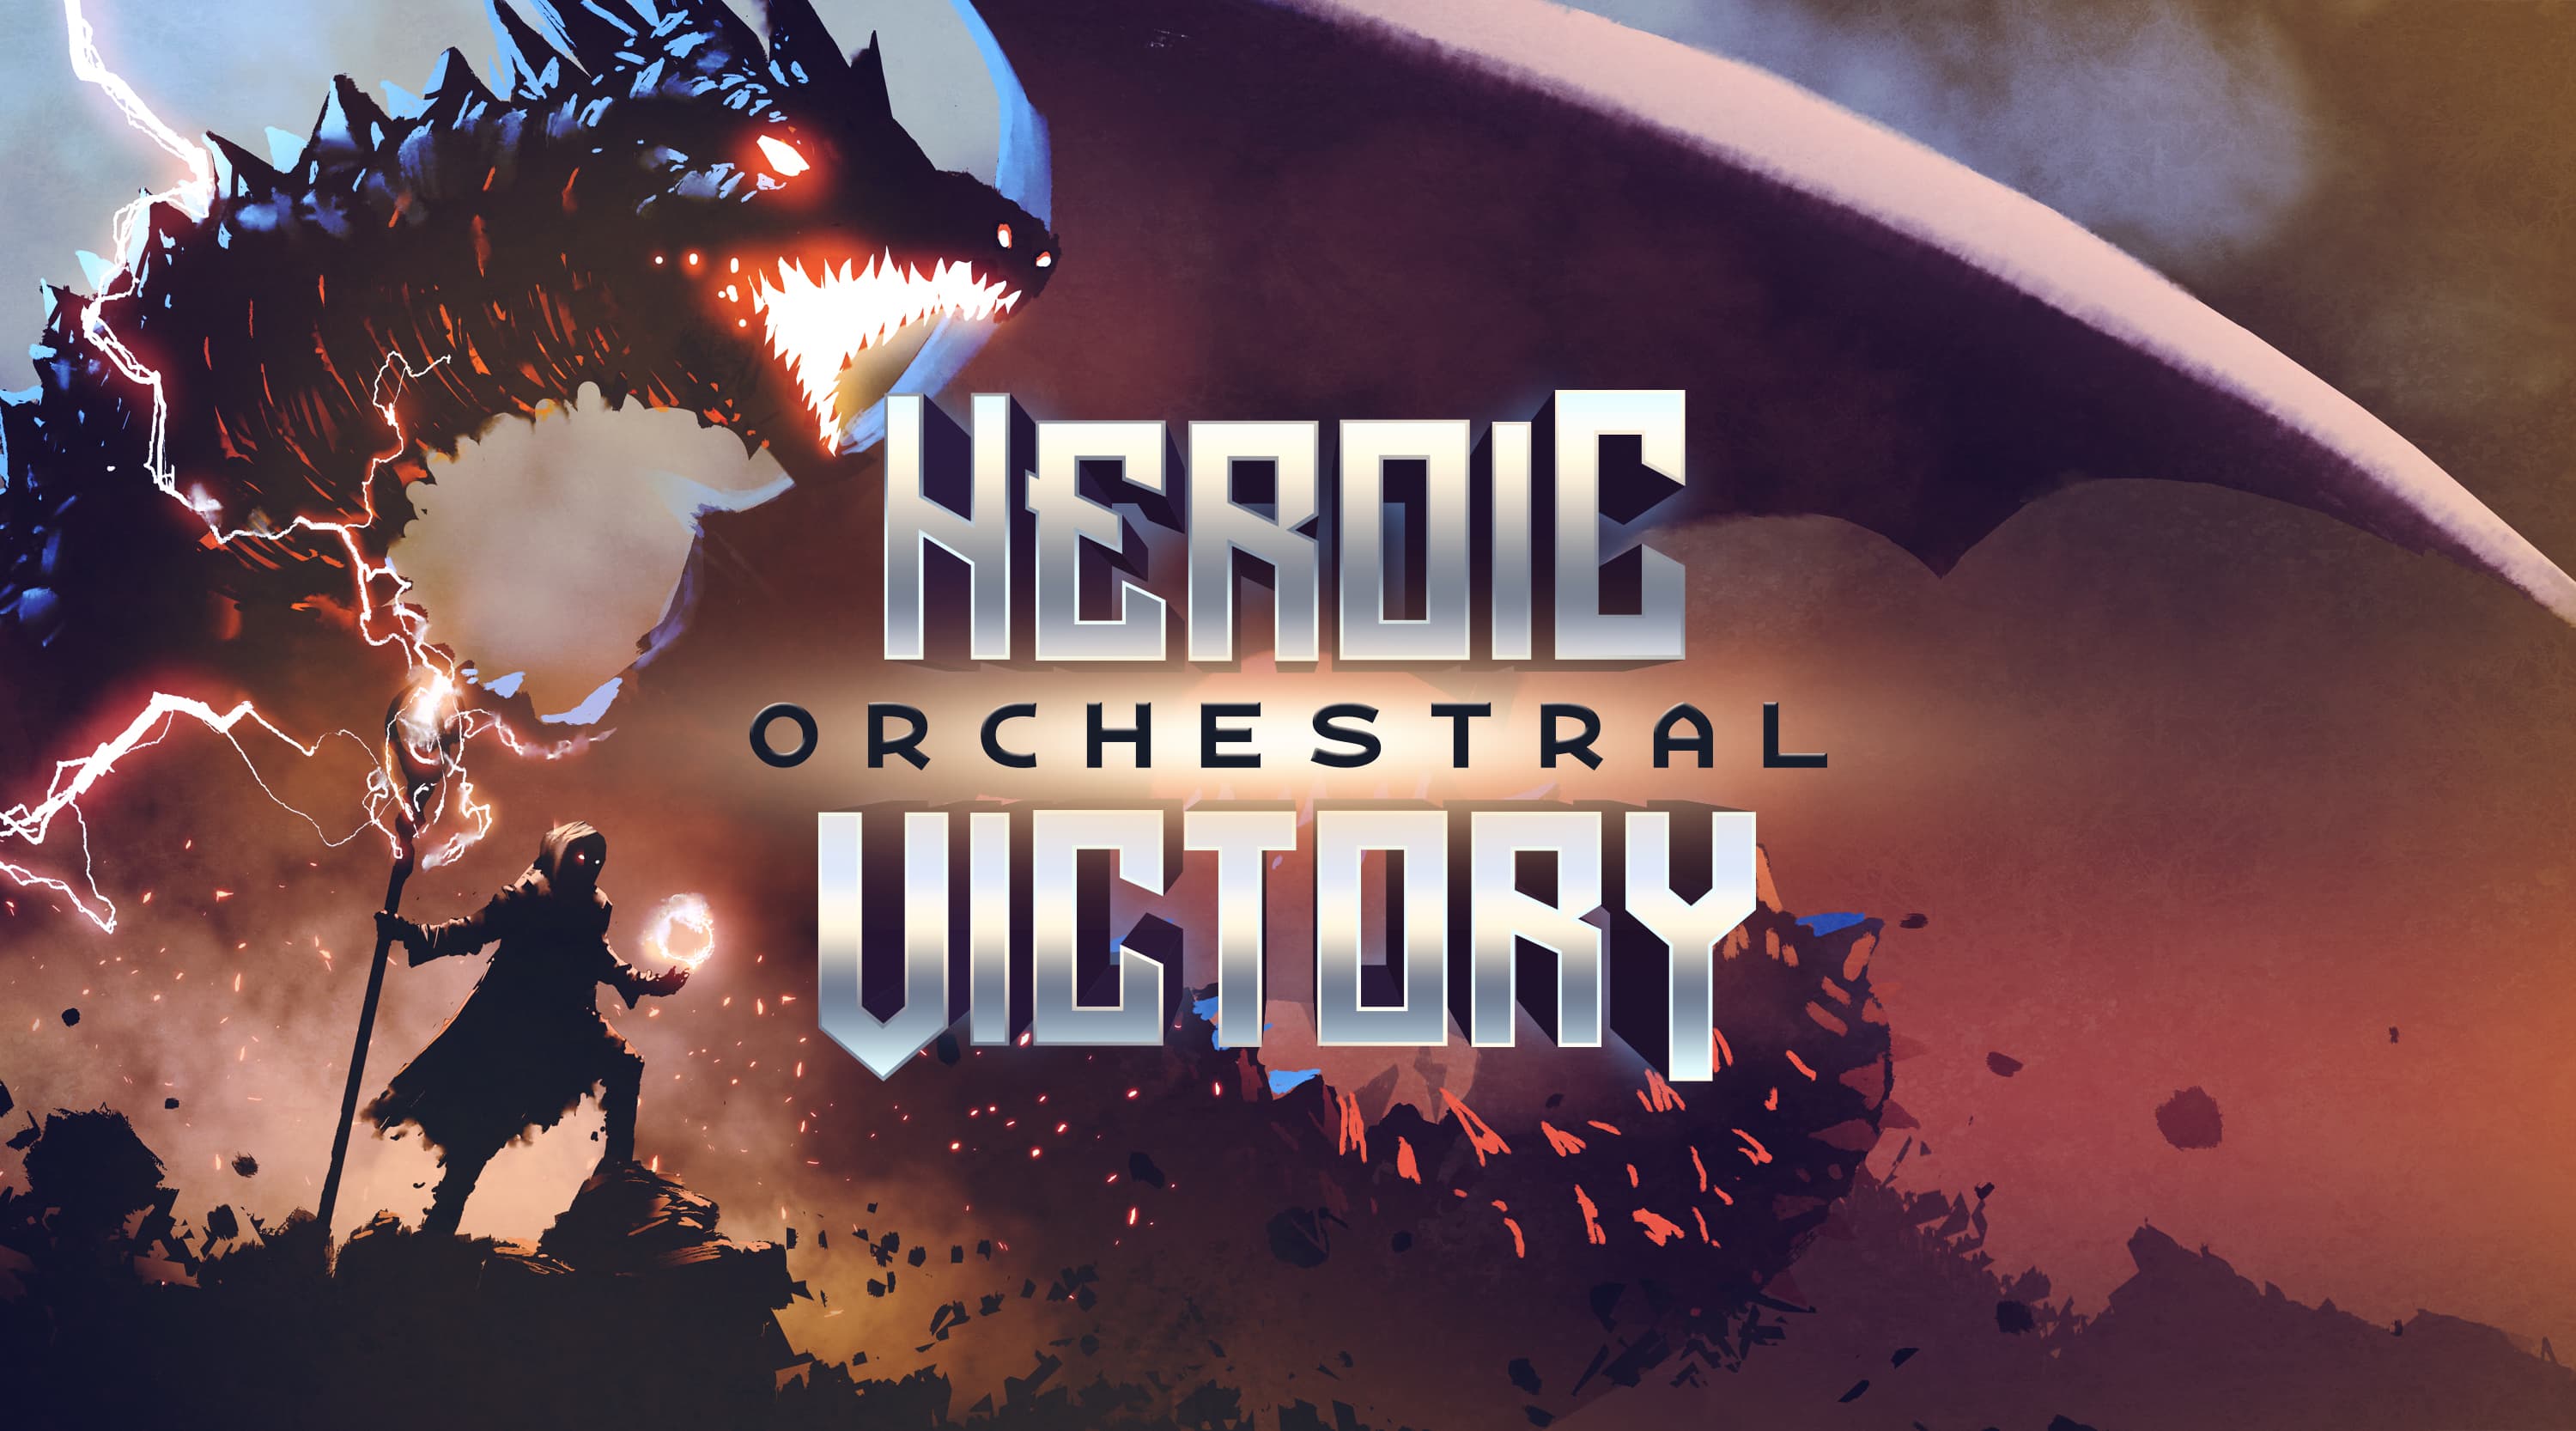 Heroic Orchestral Victory